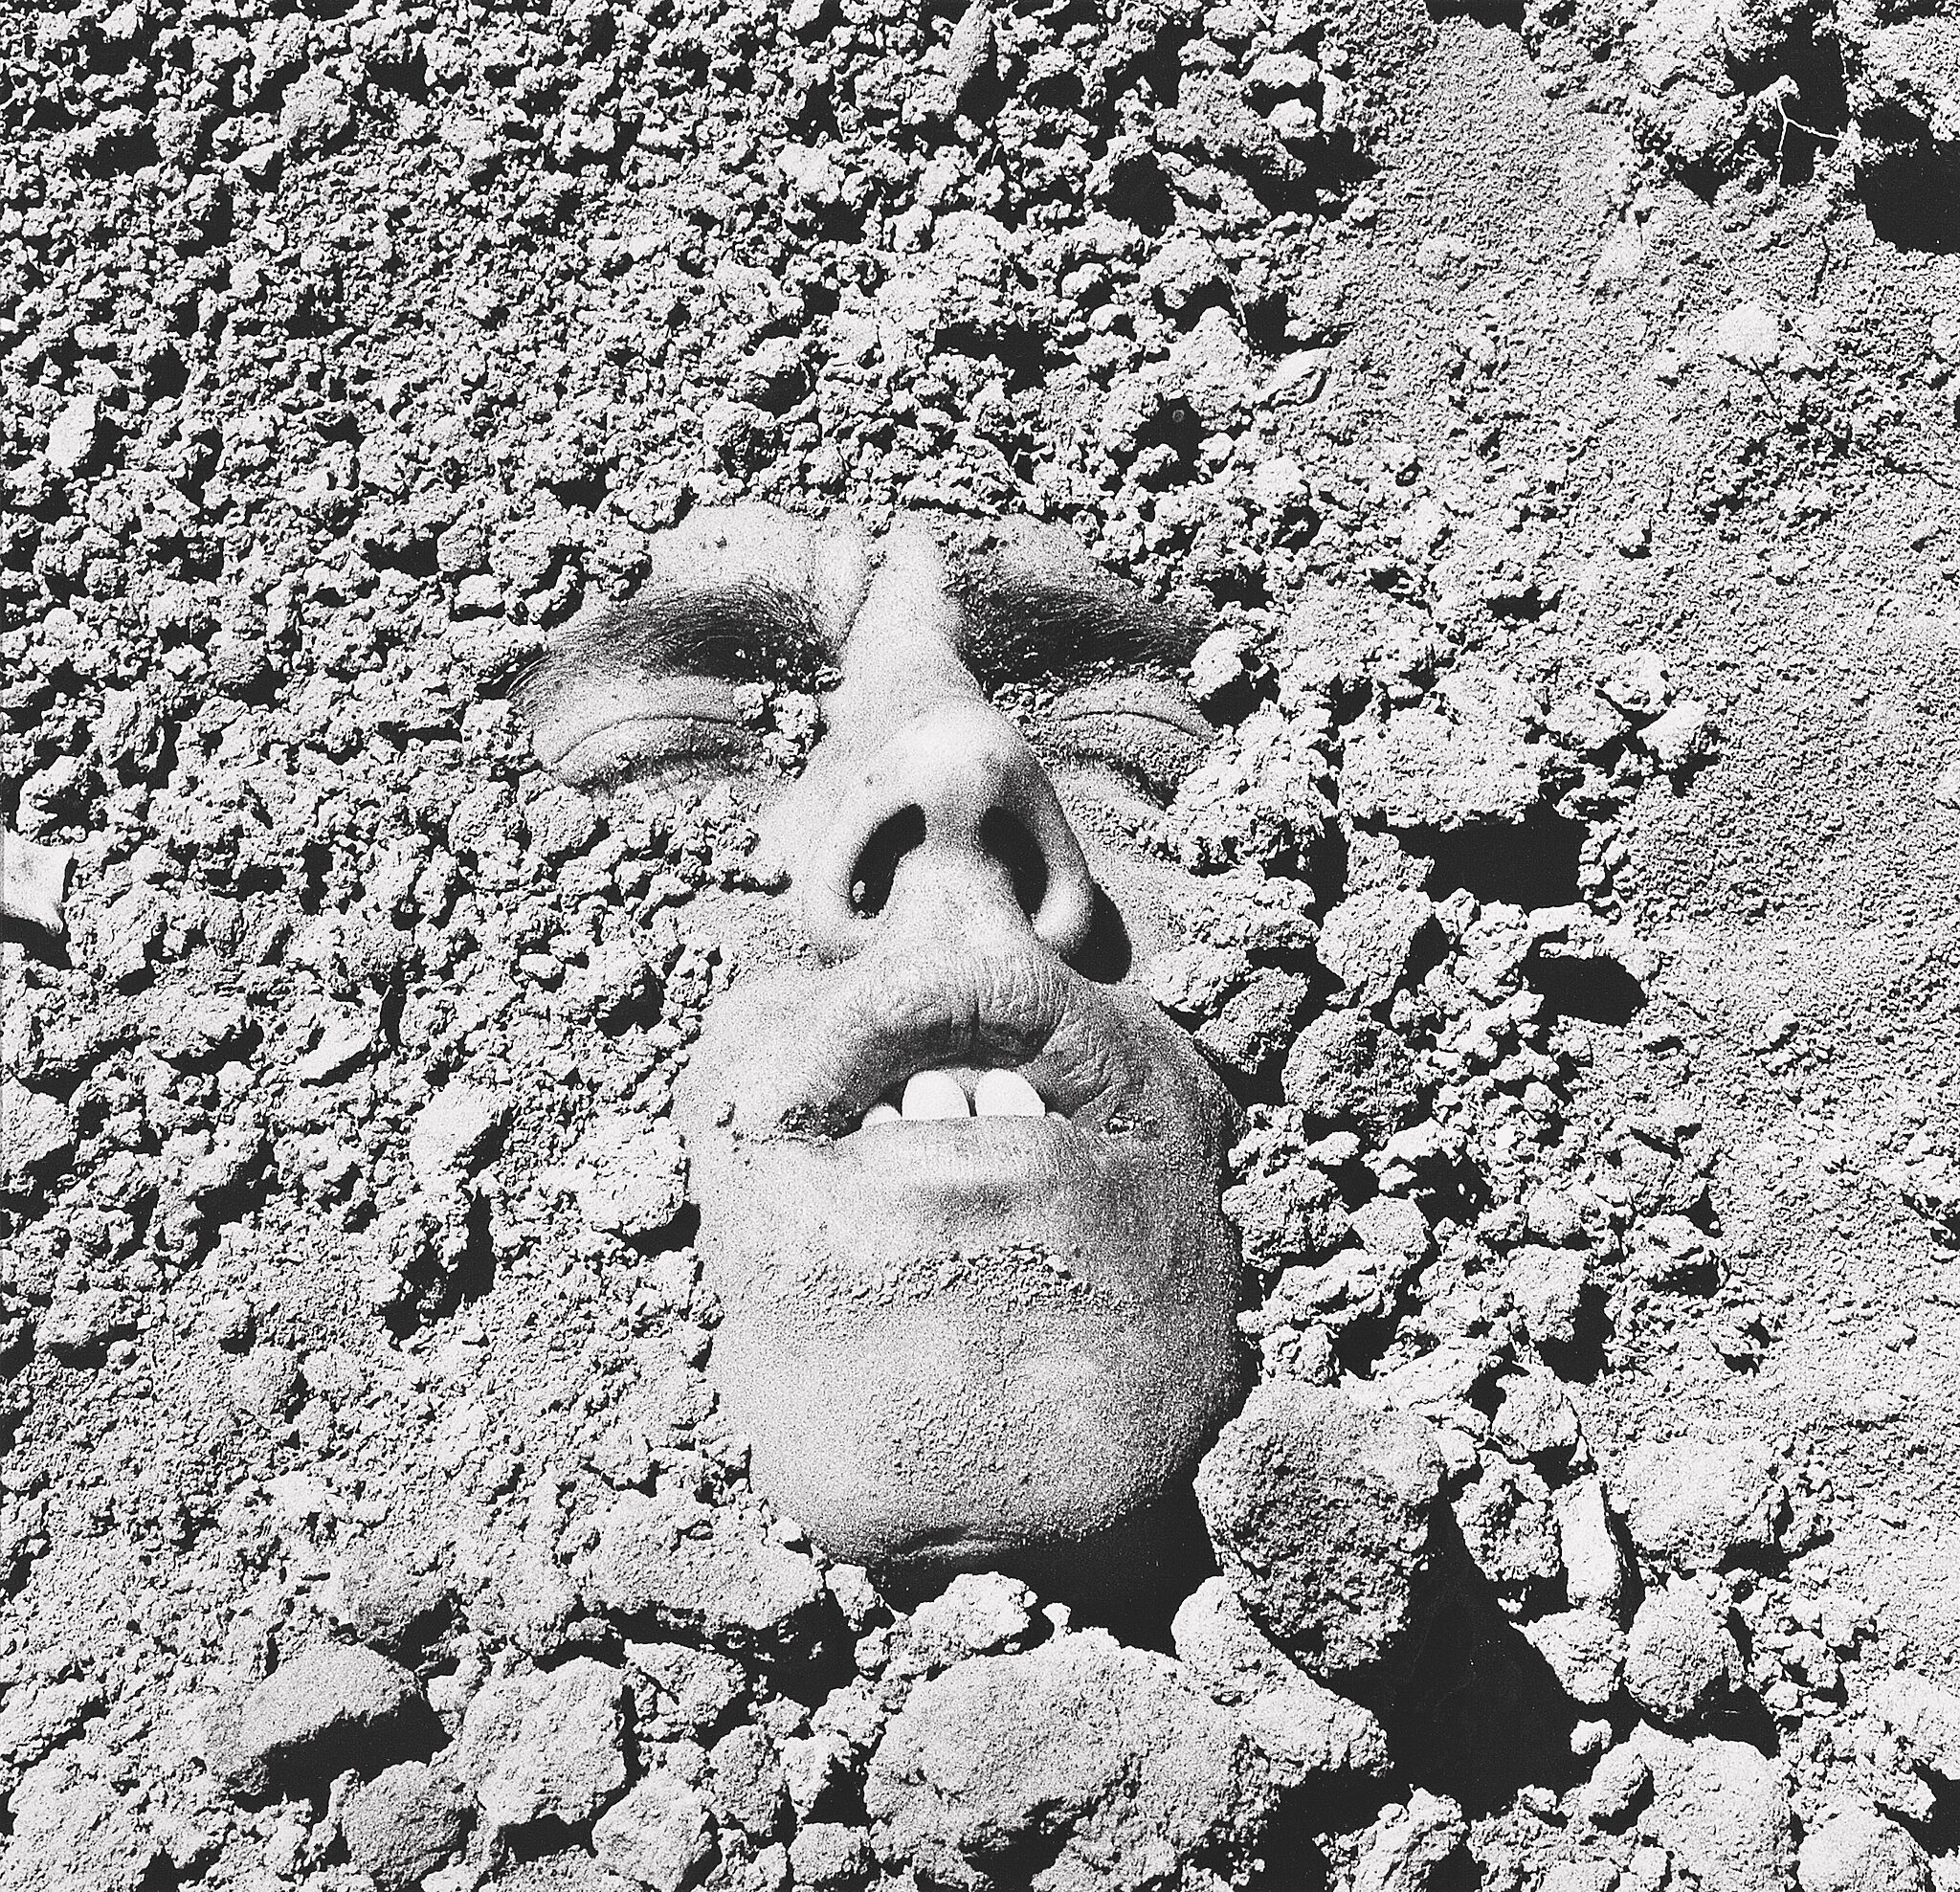 A photograph of a man's face emerging from gravel. 